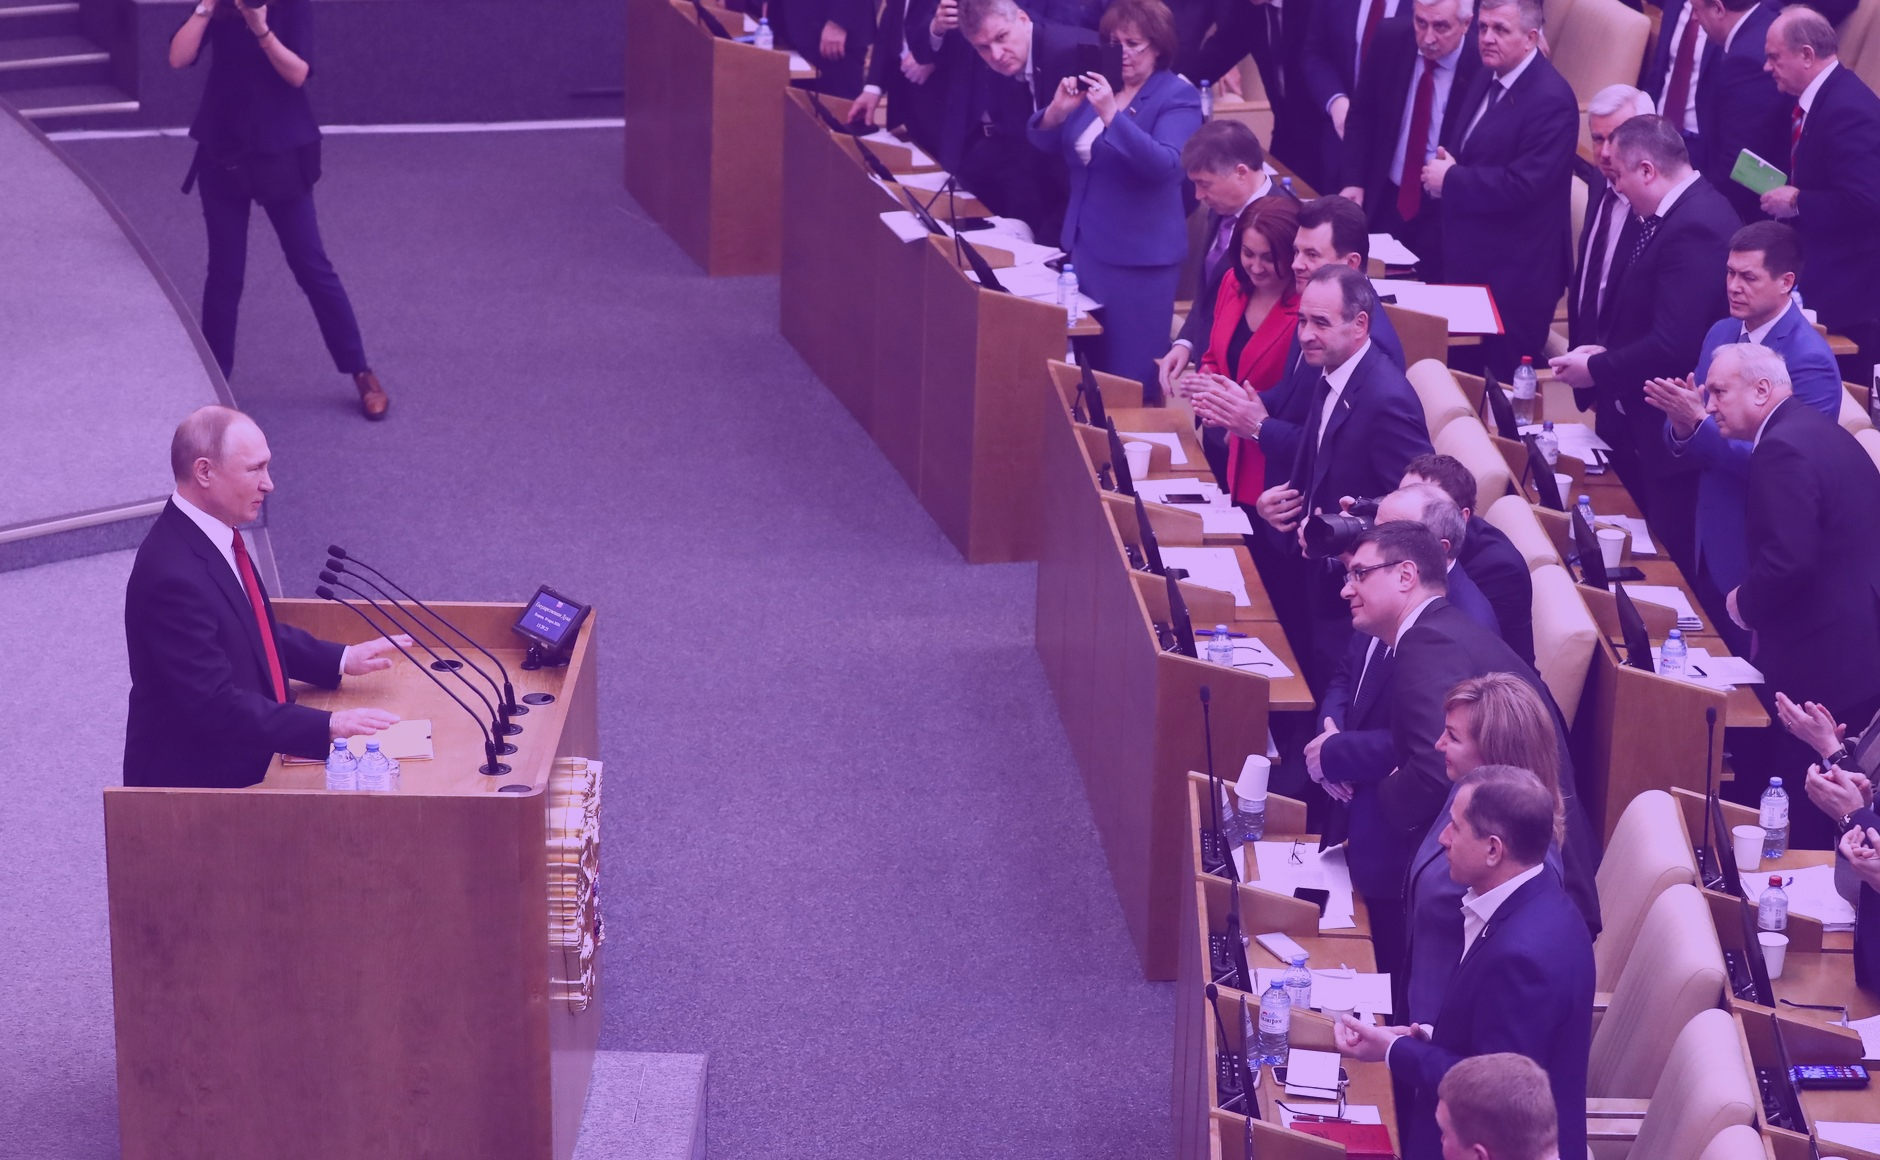 Photo: "Vladimir Putin Speech at State Duma plenary session 2020-03-10 03", by The Presidential Press and Information Office, licensed under CC BY 4.0. Hue modified from the original